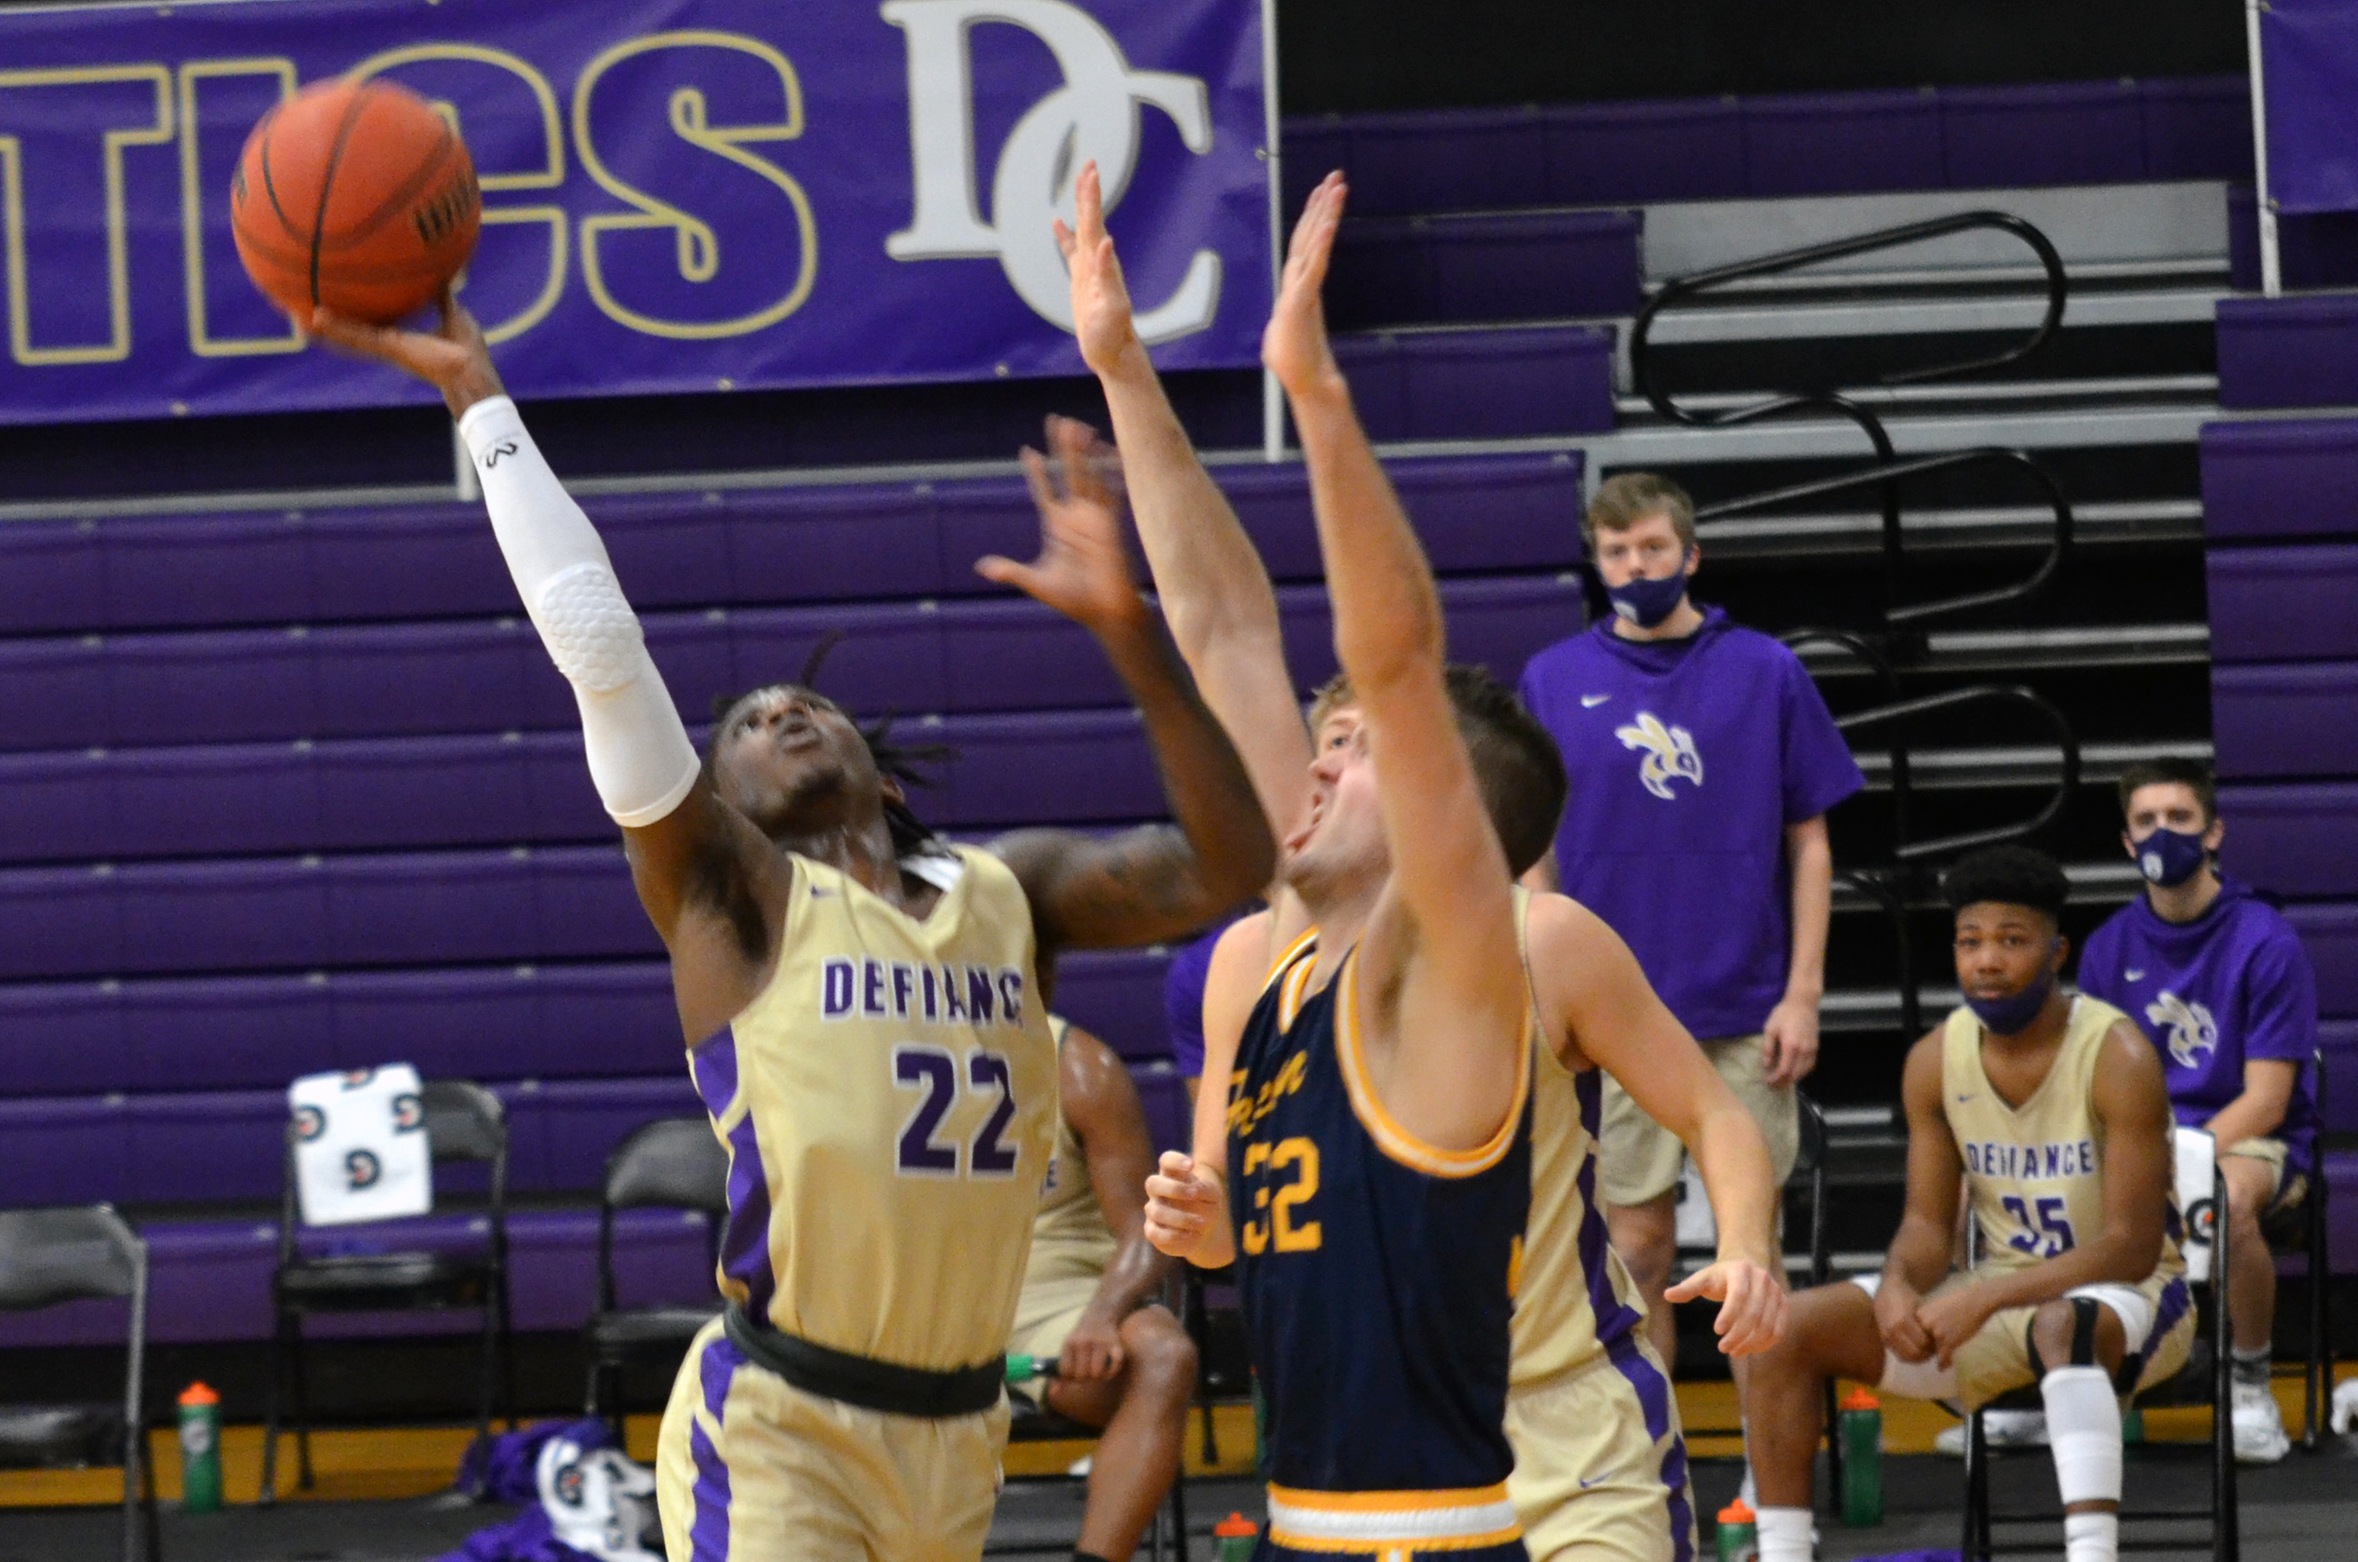 Men’s basketball loses home contest against Franklin